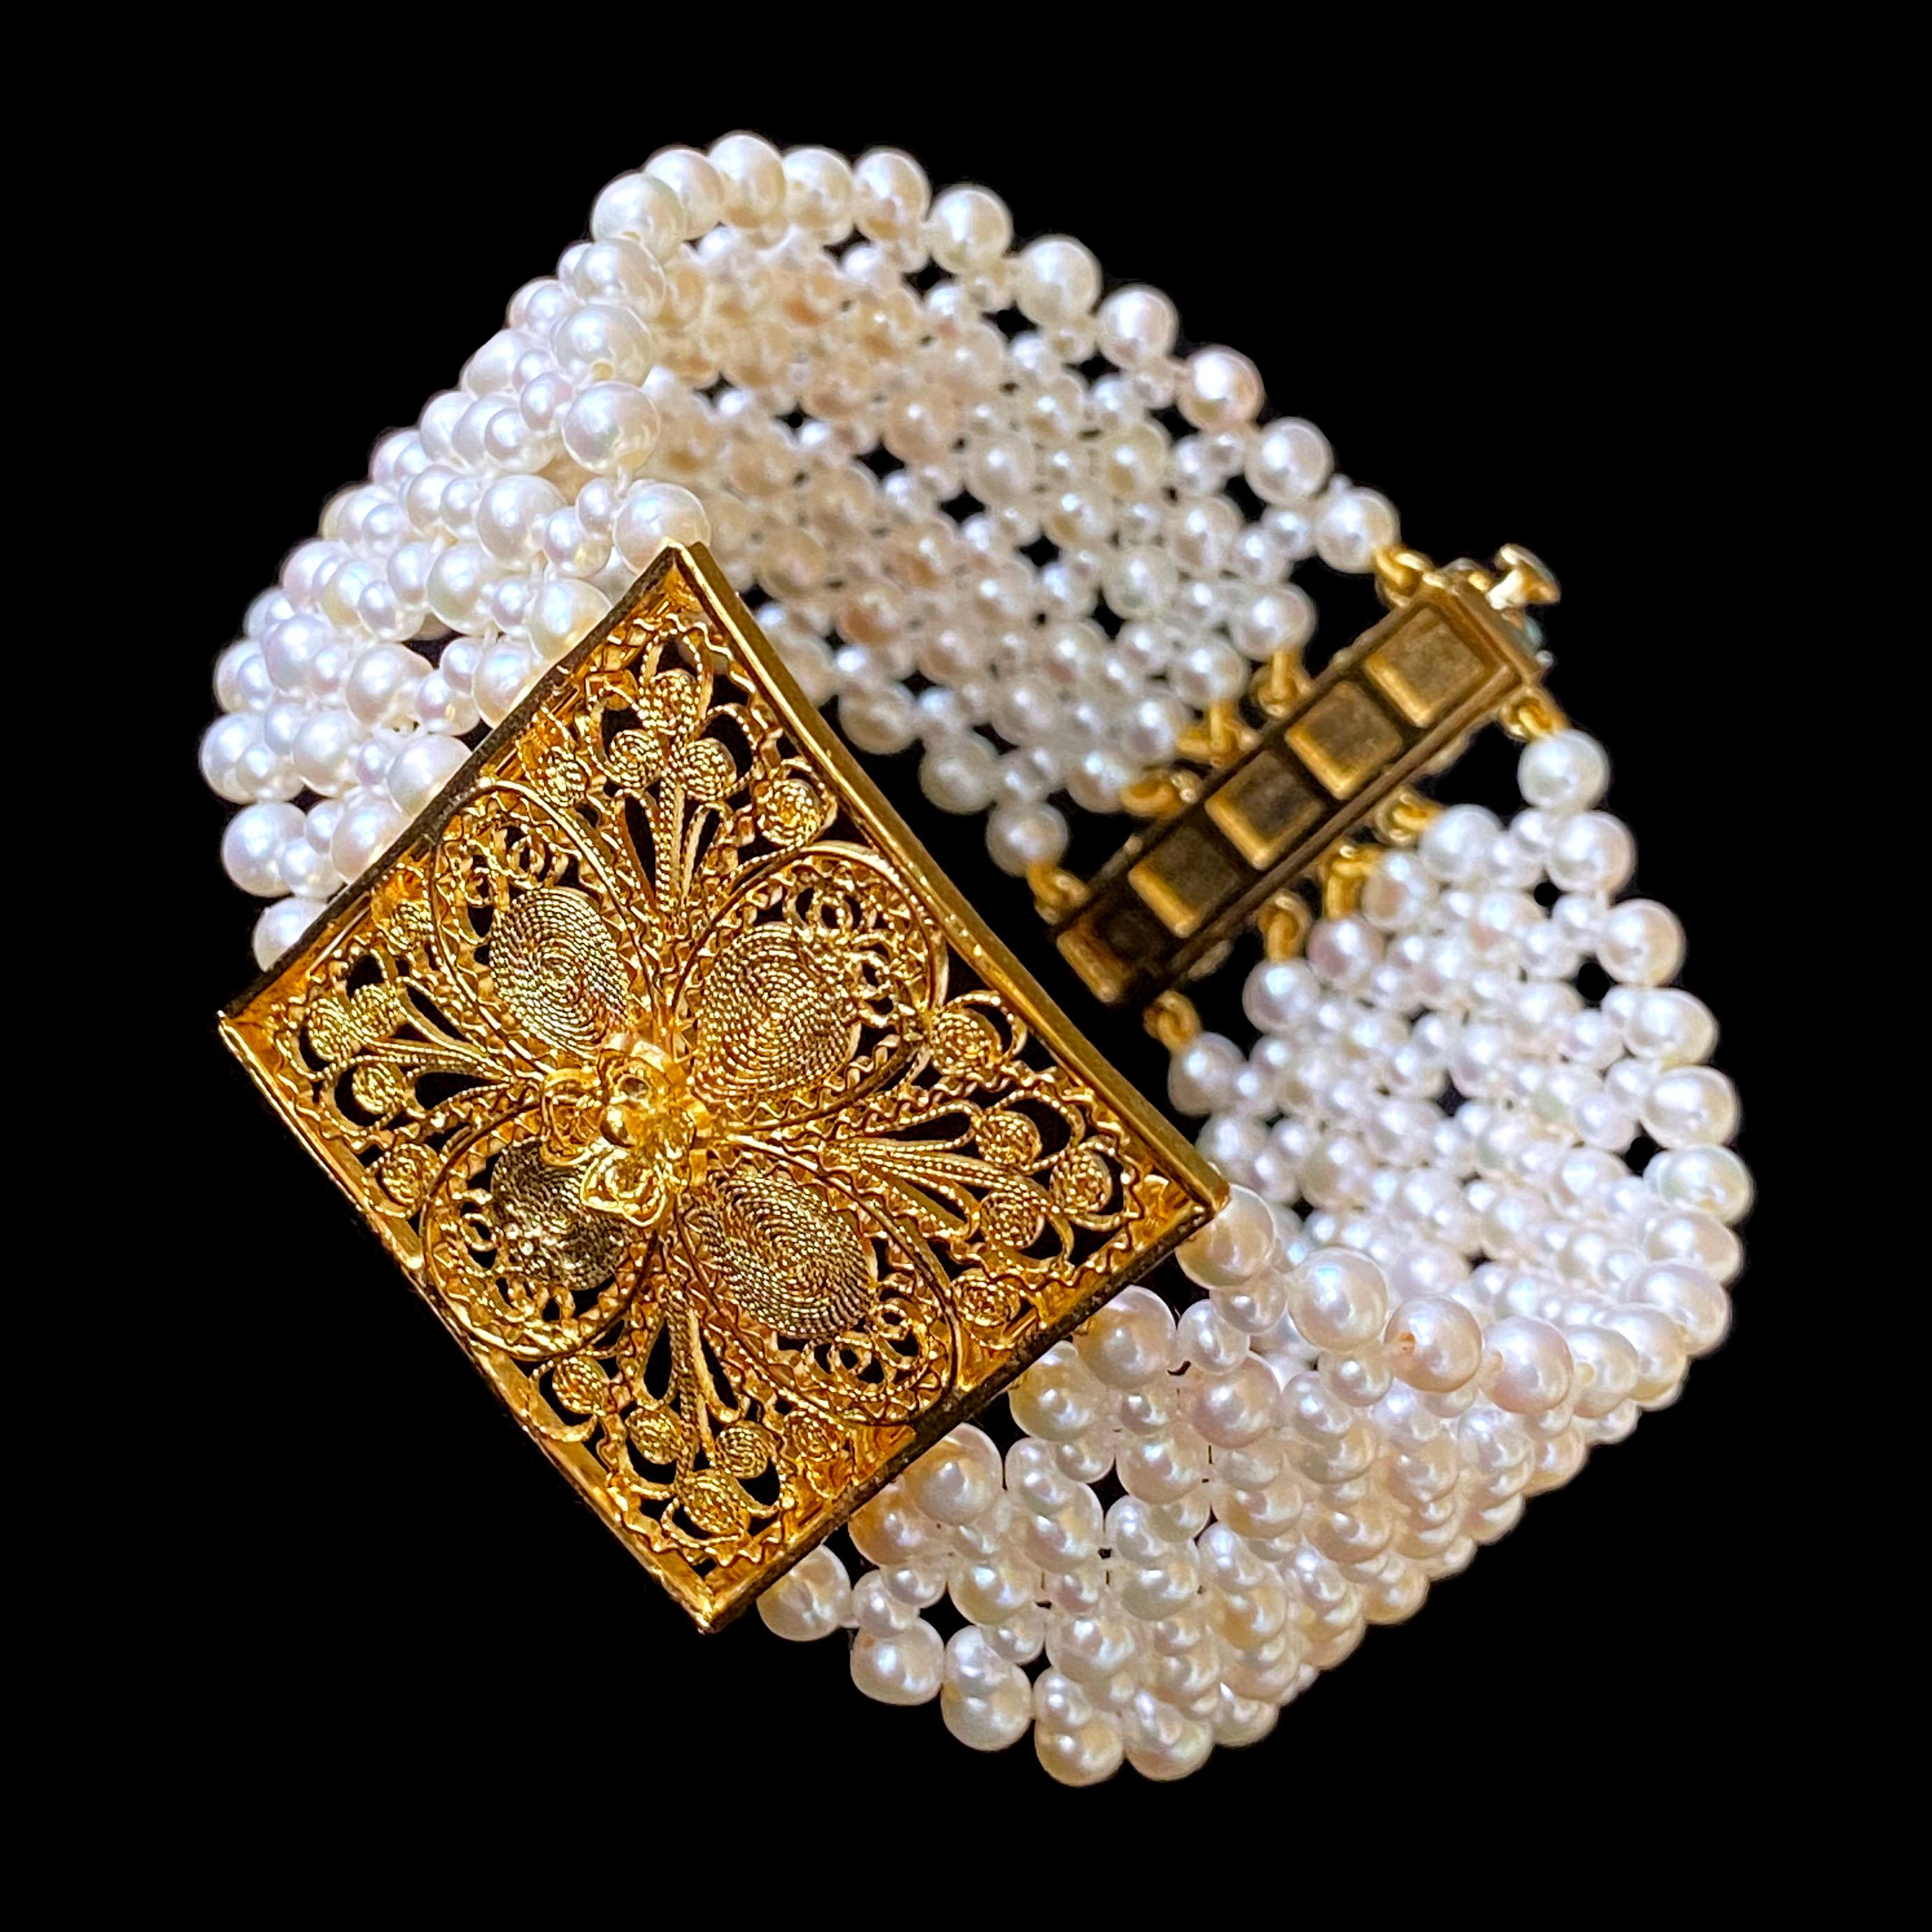 Women's Marina J. Woven Pearl Bracelet with 18k Yellow Gold Floral Centerpiece & Clasp